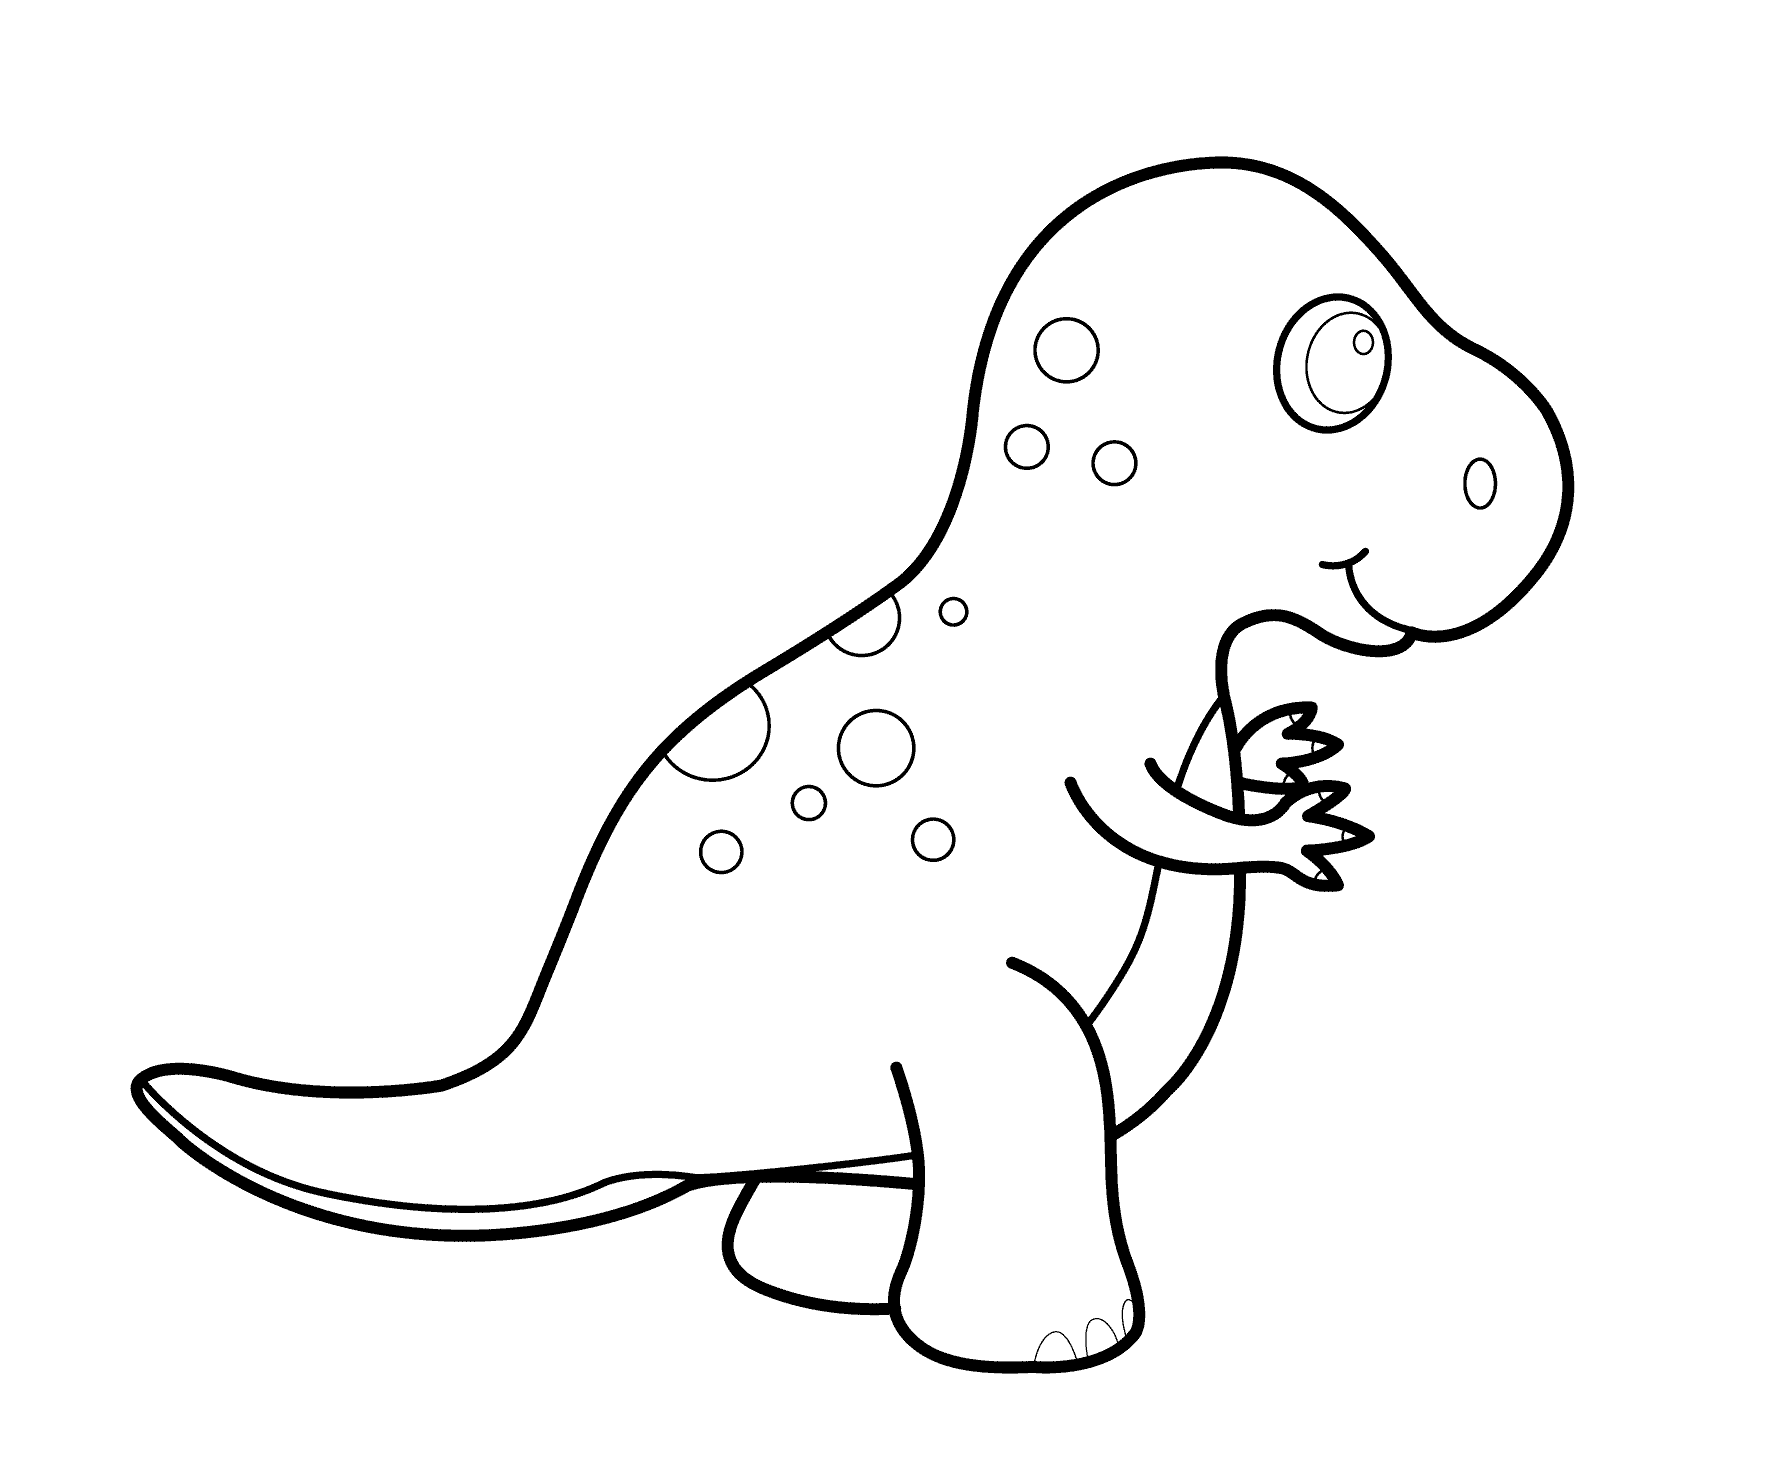 How to draw a simple t rex rewamagazines